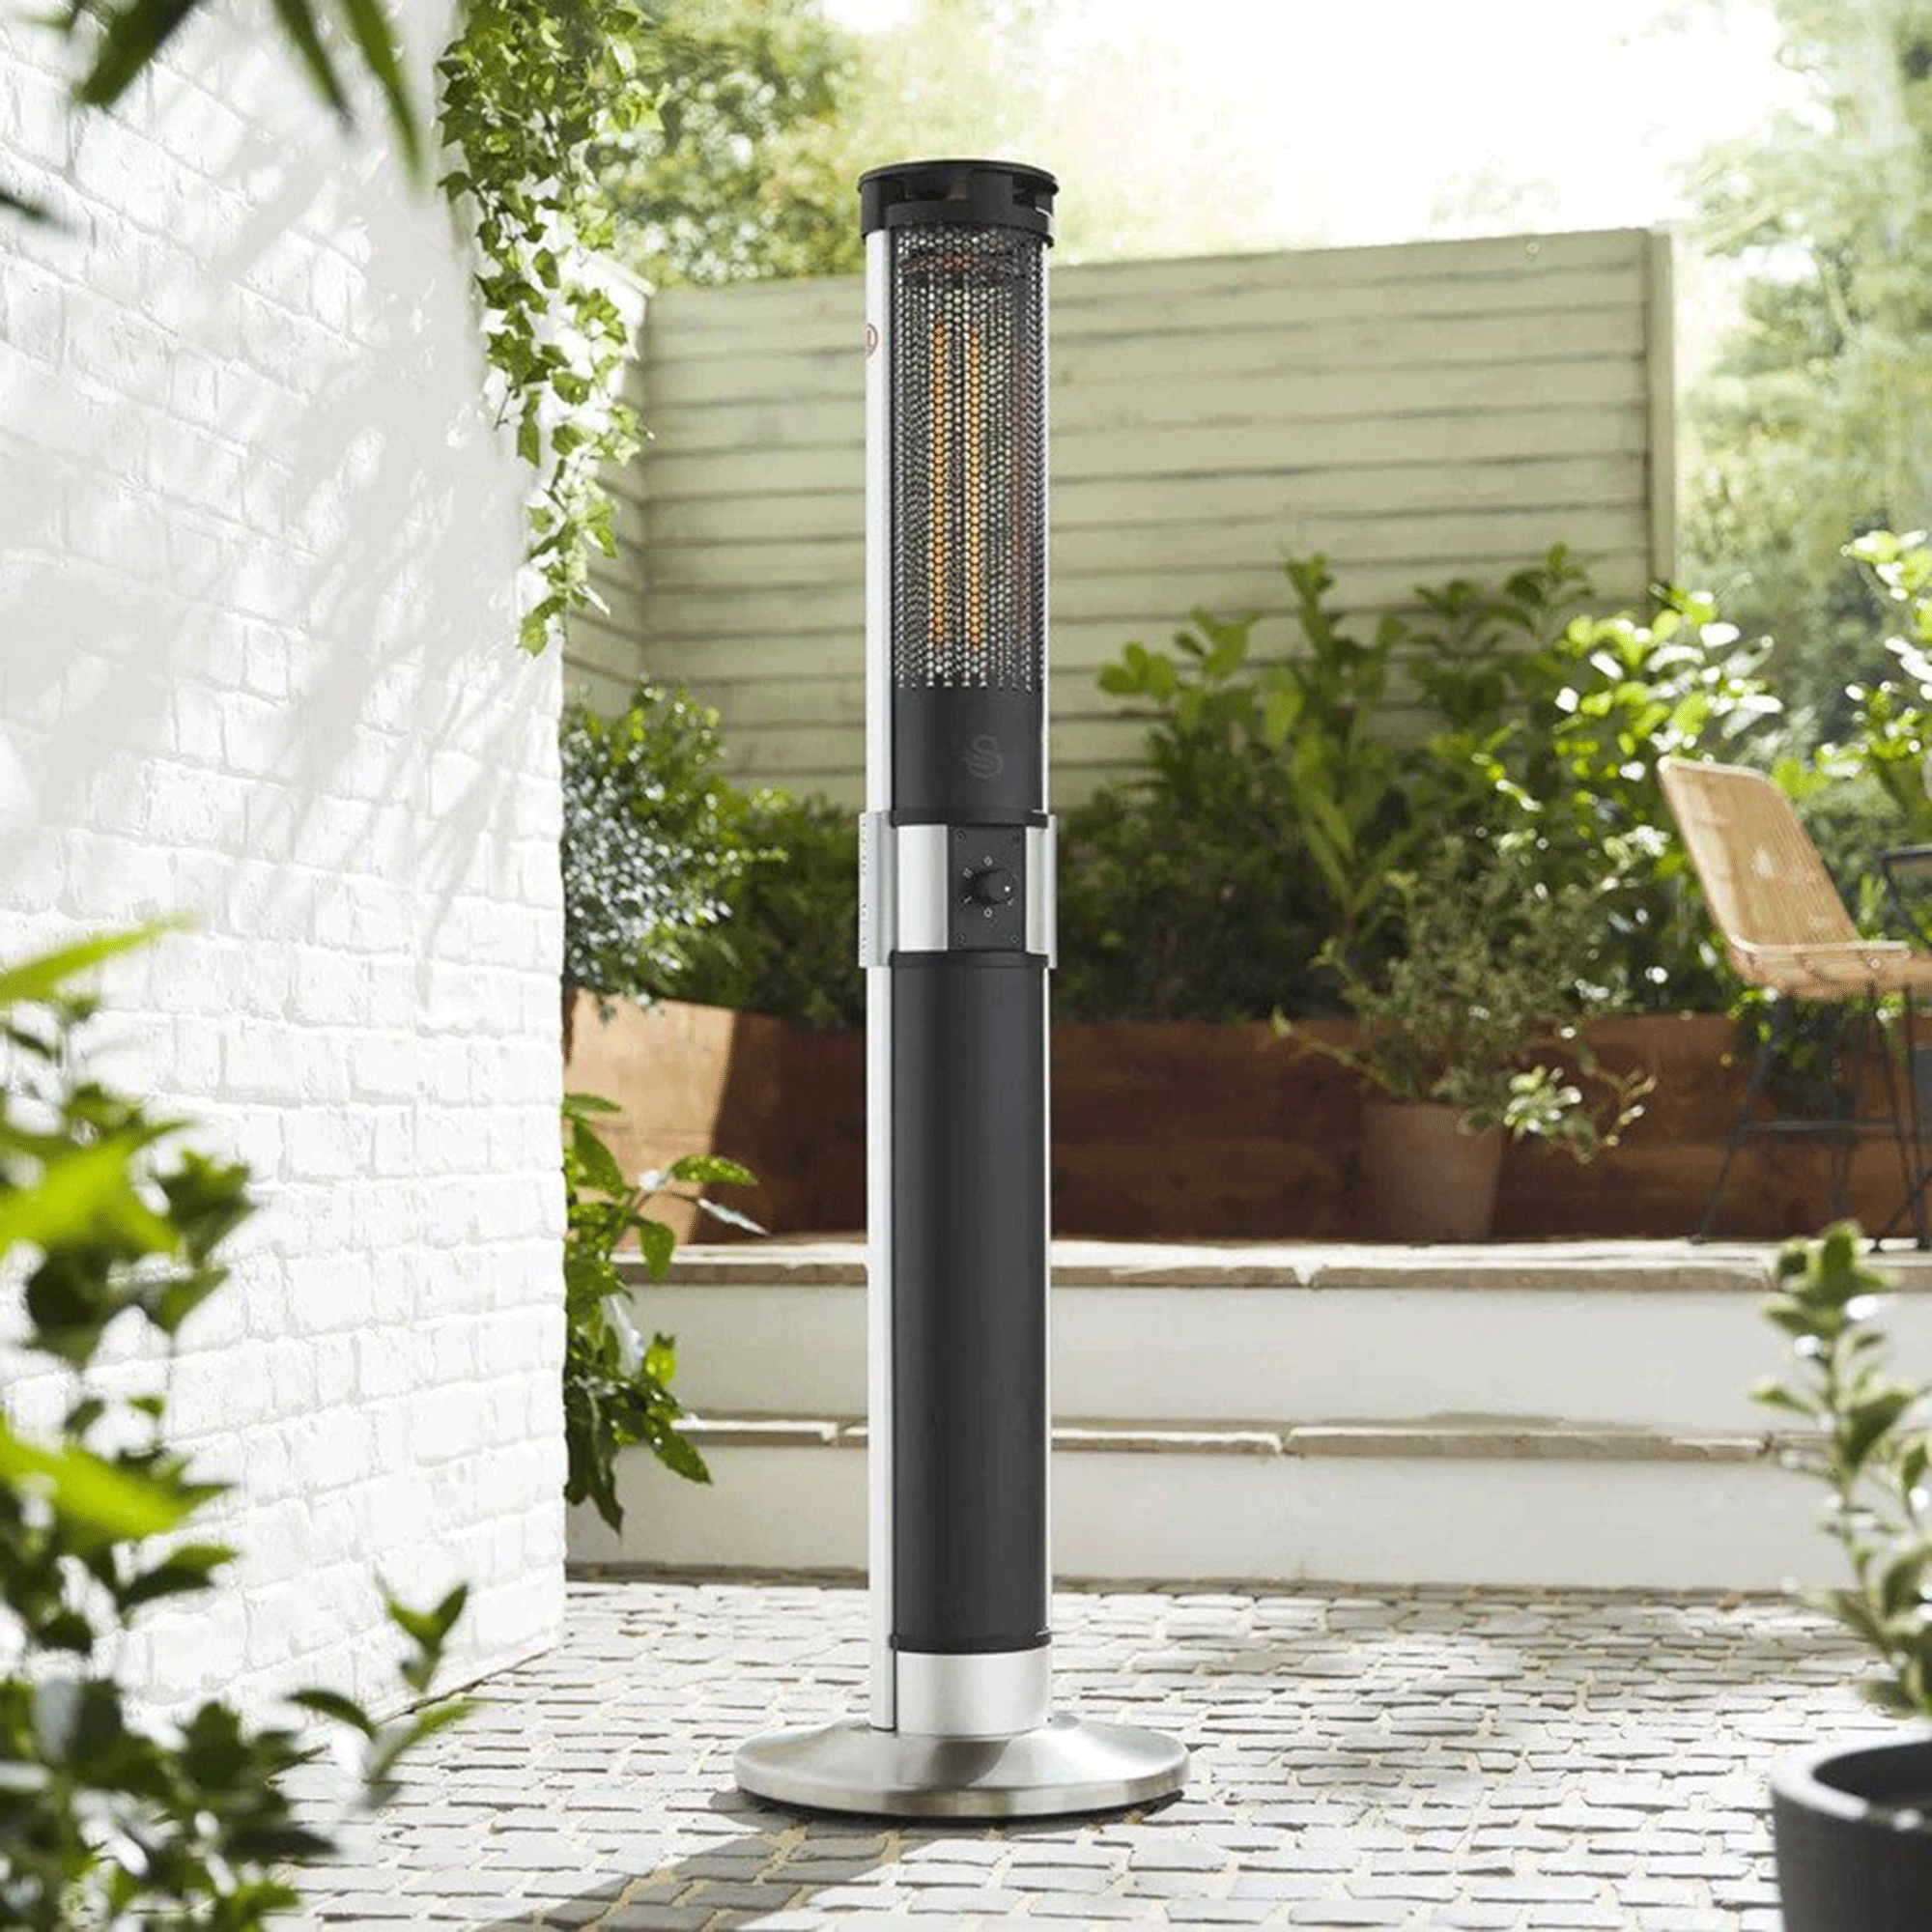 Amazon Prime Day may be over - but this five-star Swan patio heater is still reduced by £60